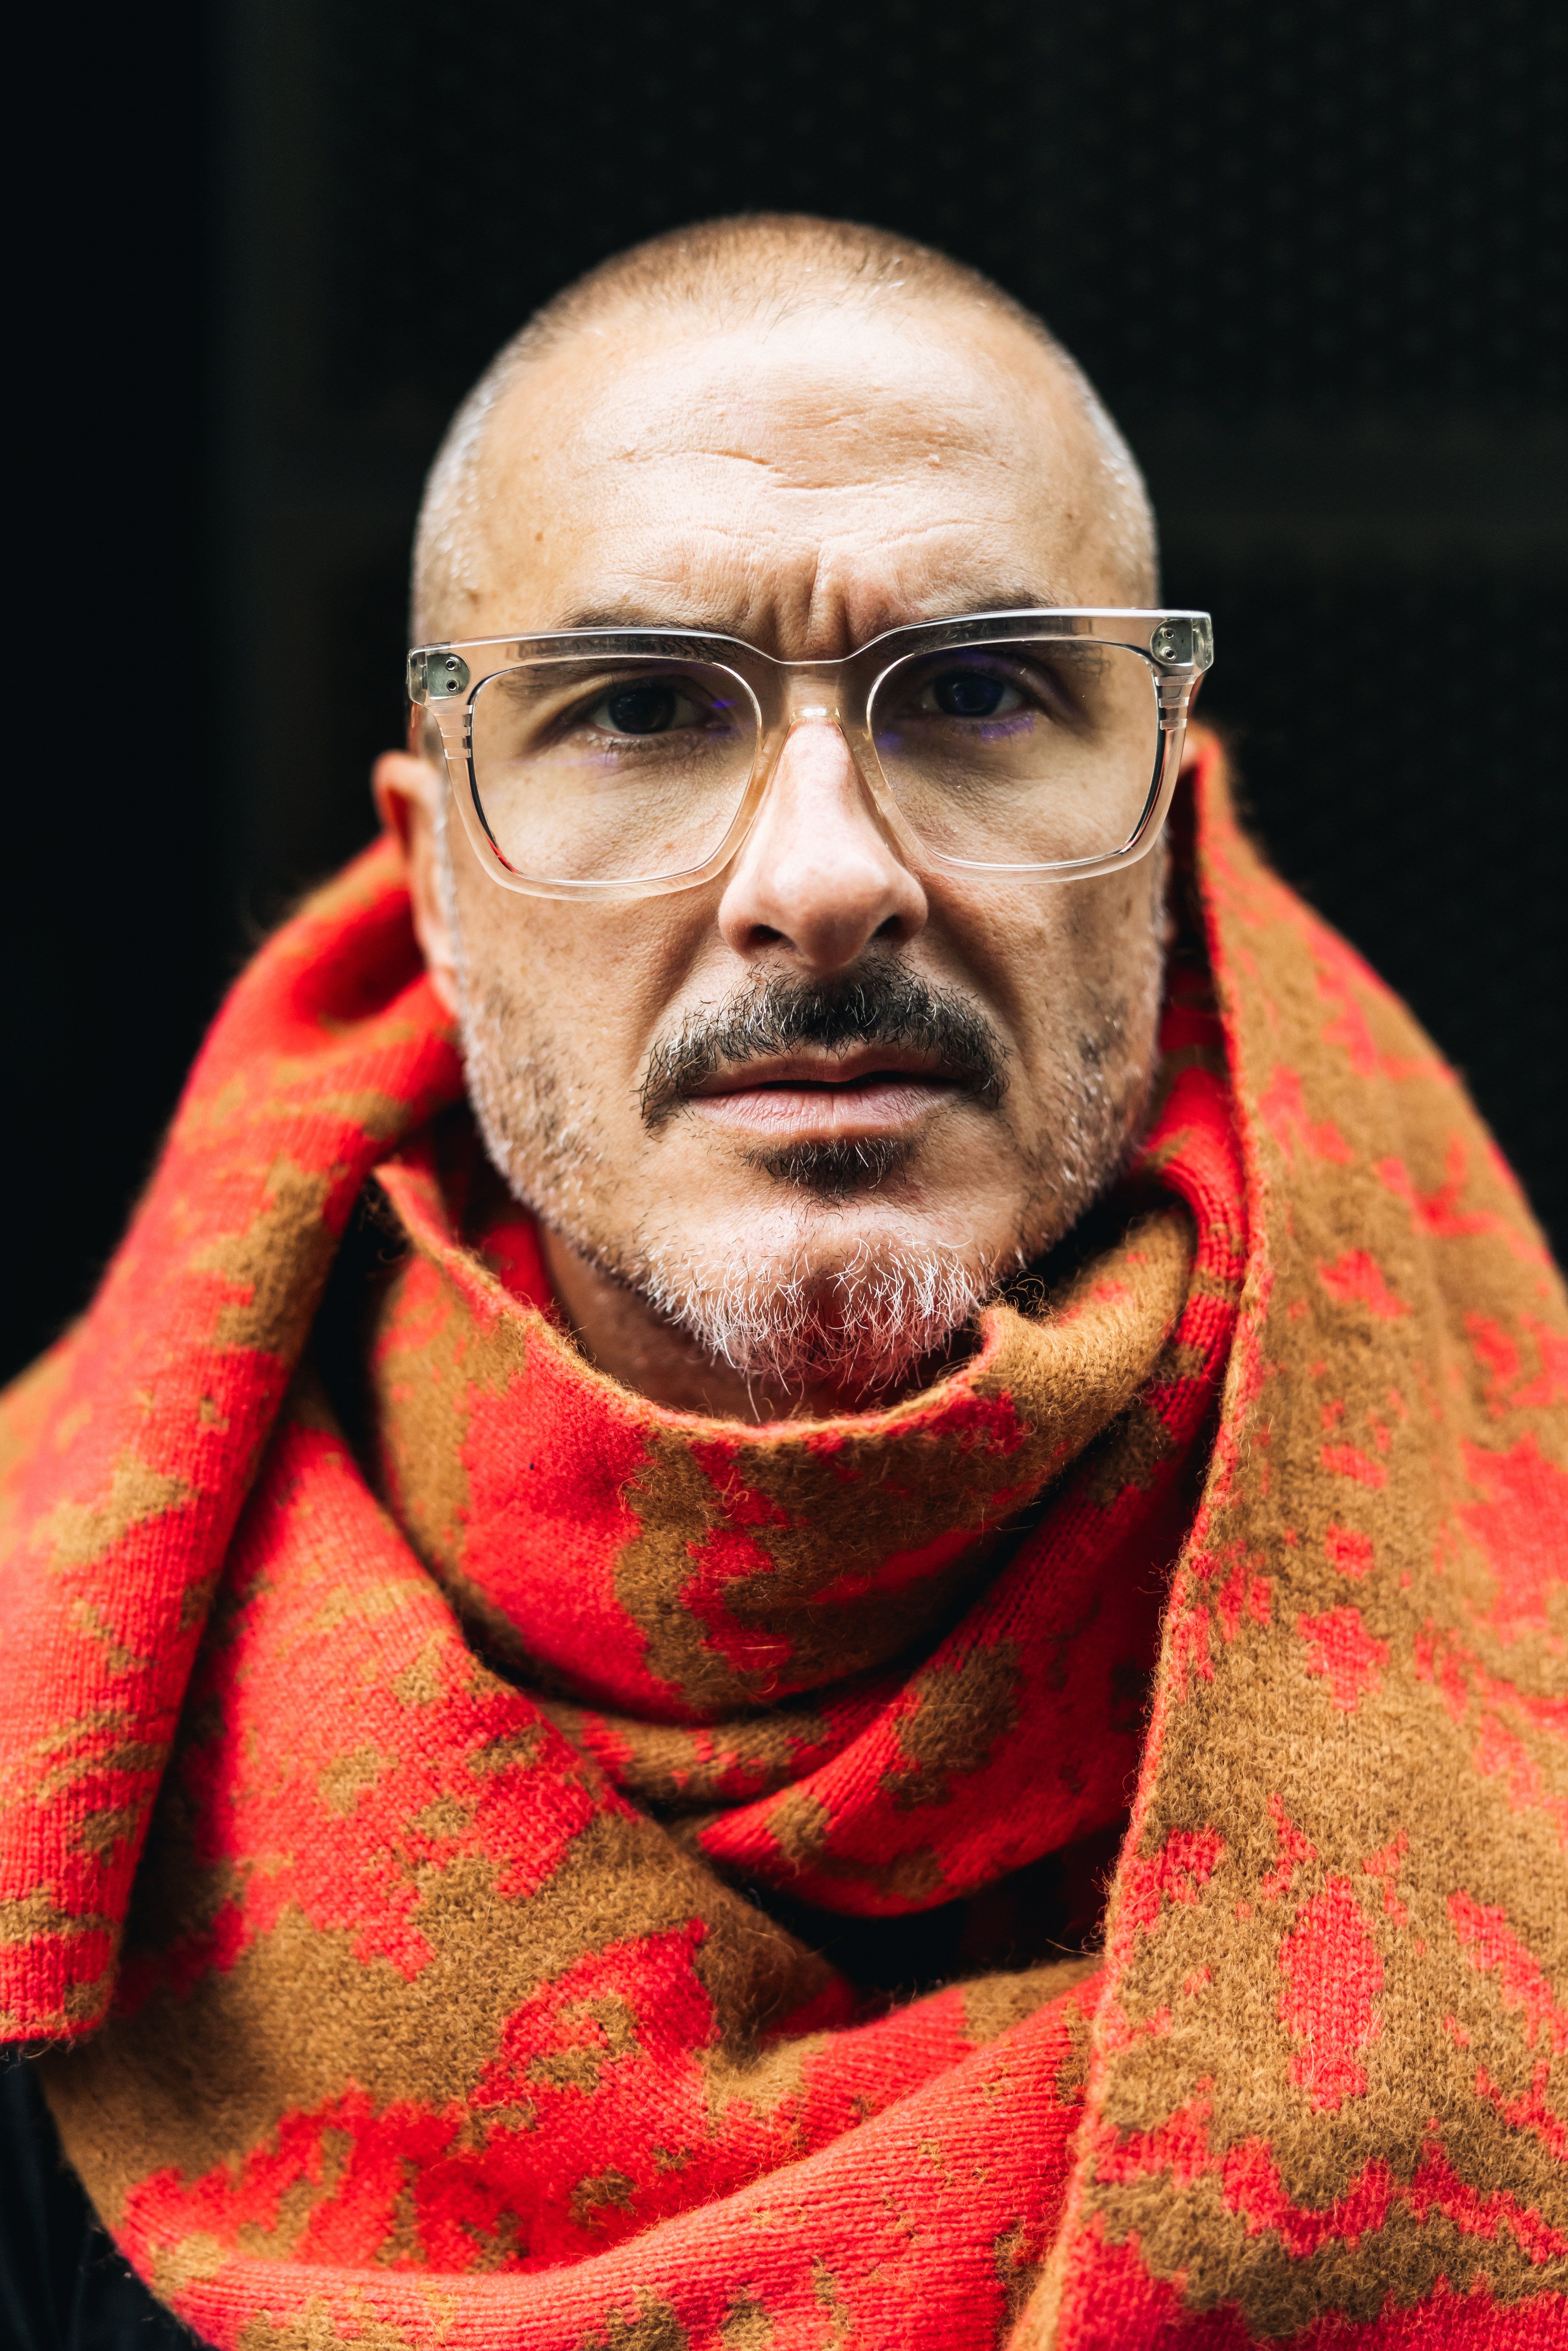 Five Fits With: Zane Lowe, Who Loves Great Style Almost as Much